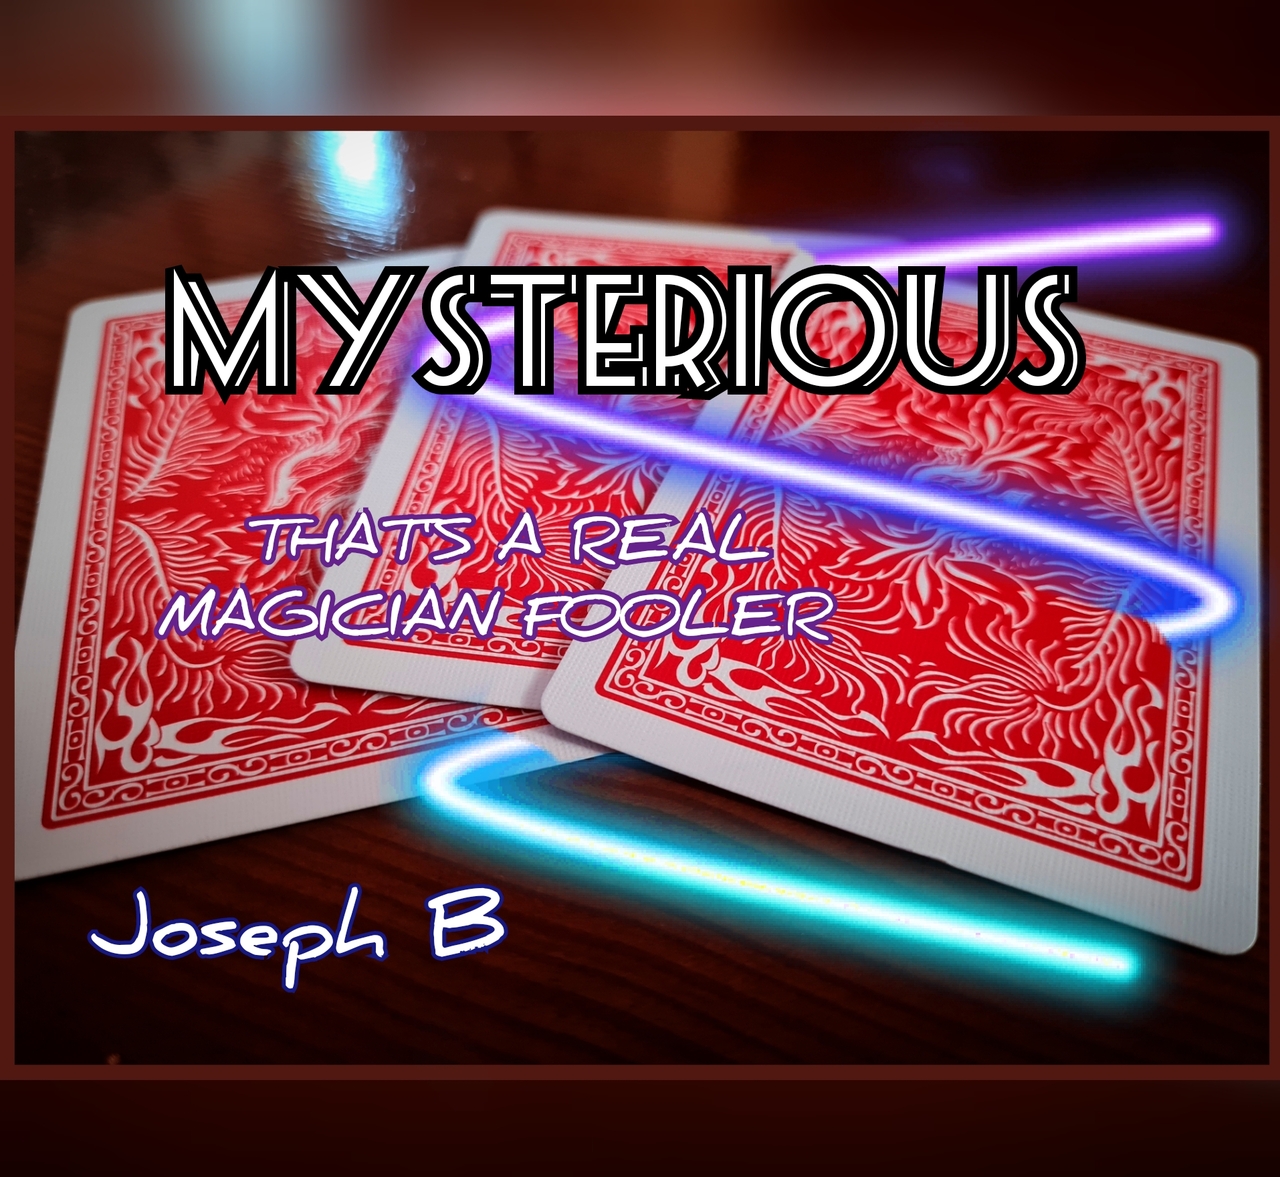 MYSTERIOUS By Joseph B. (Mp4 Videos Download)